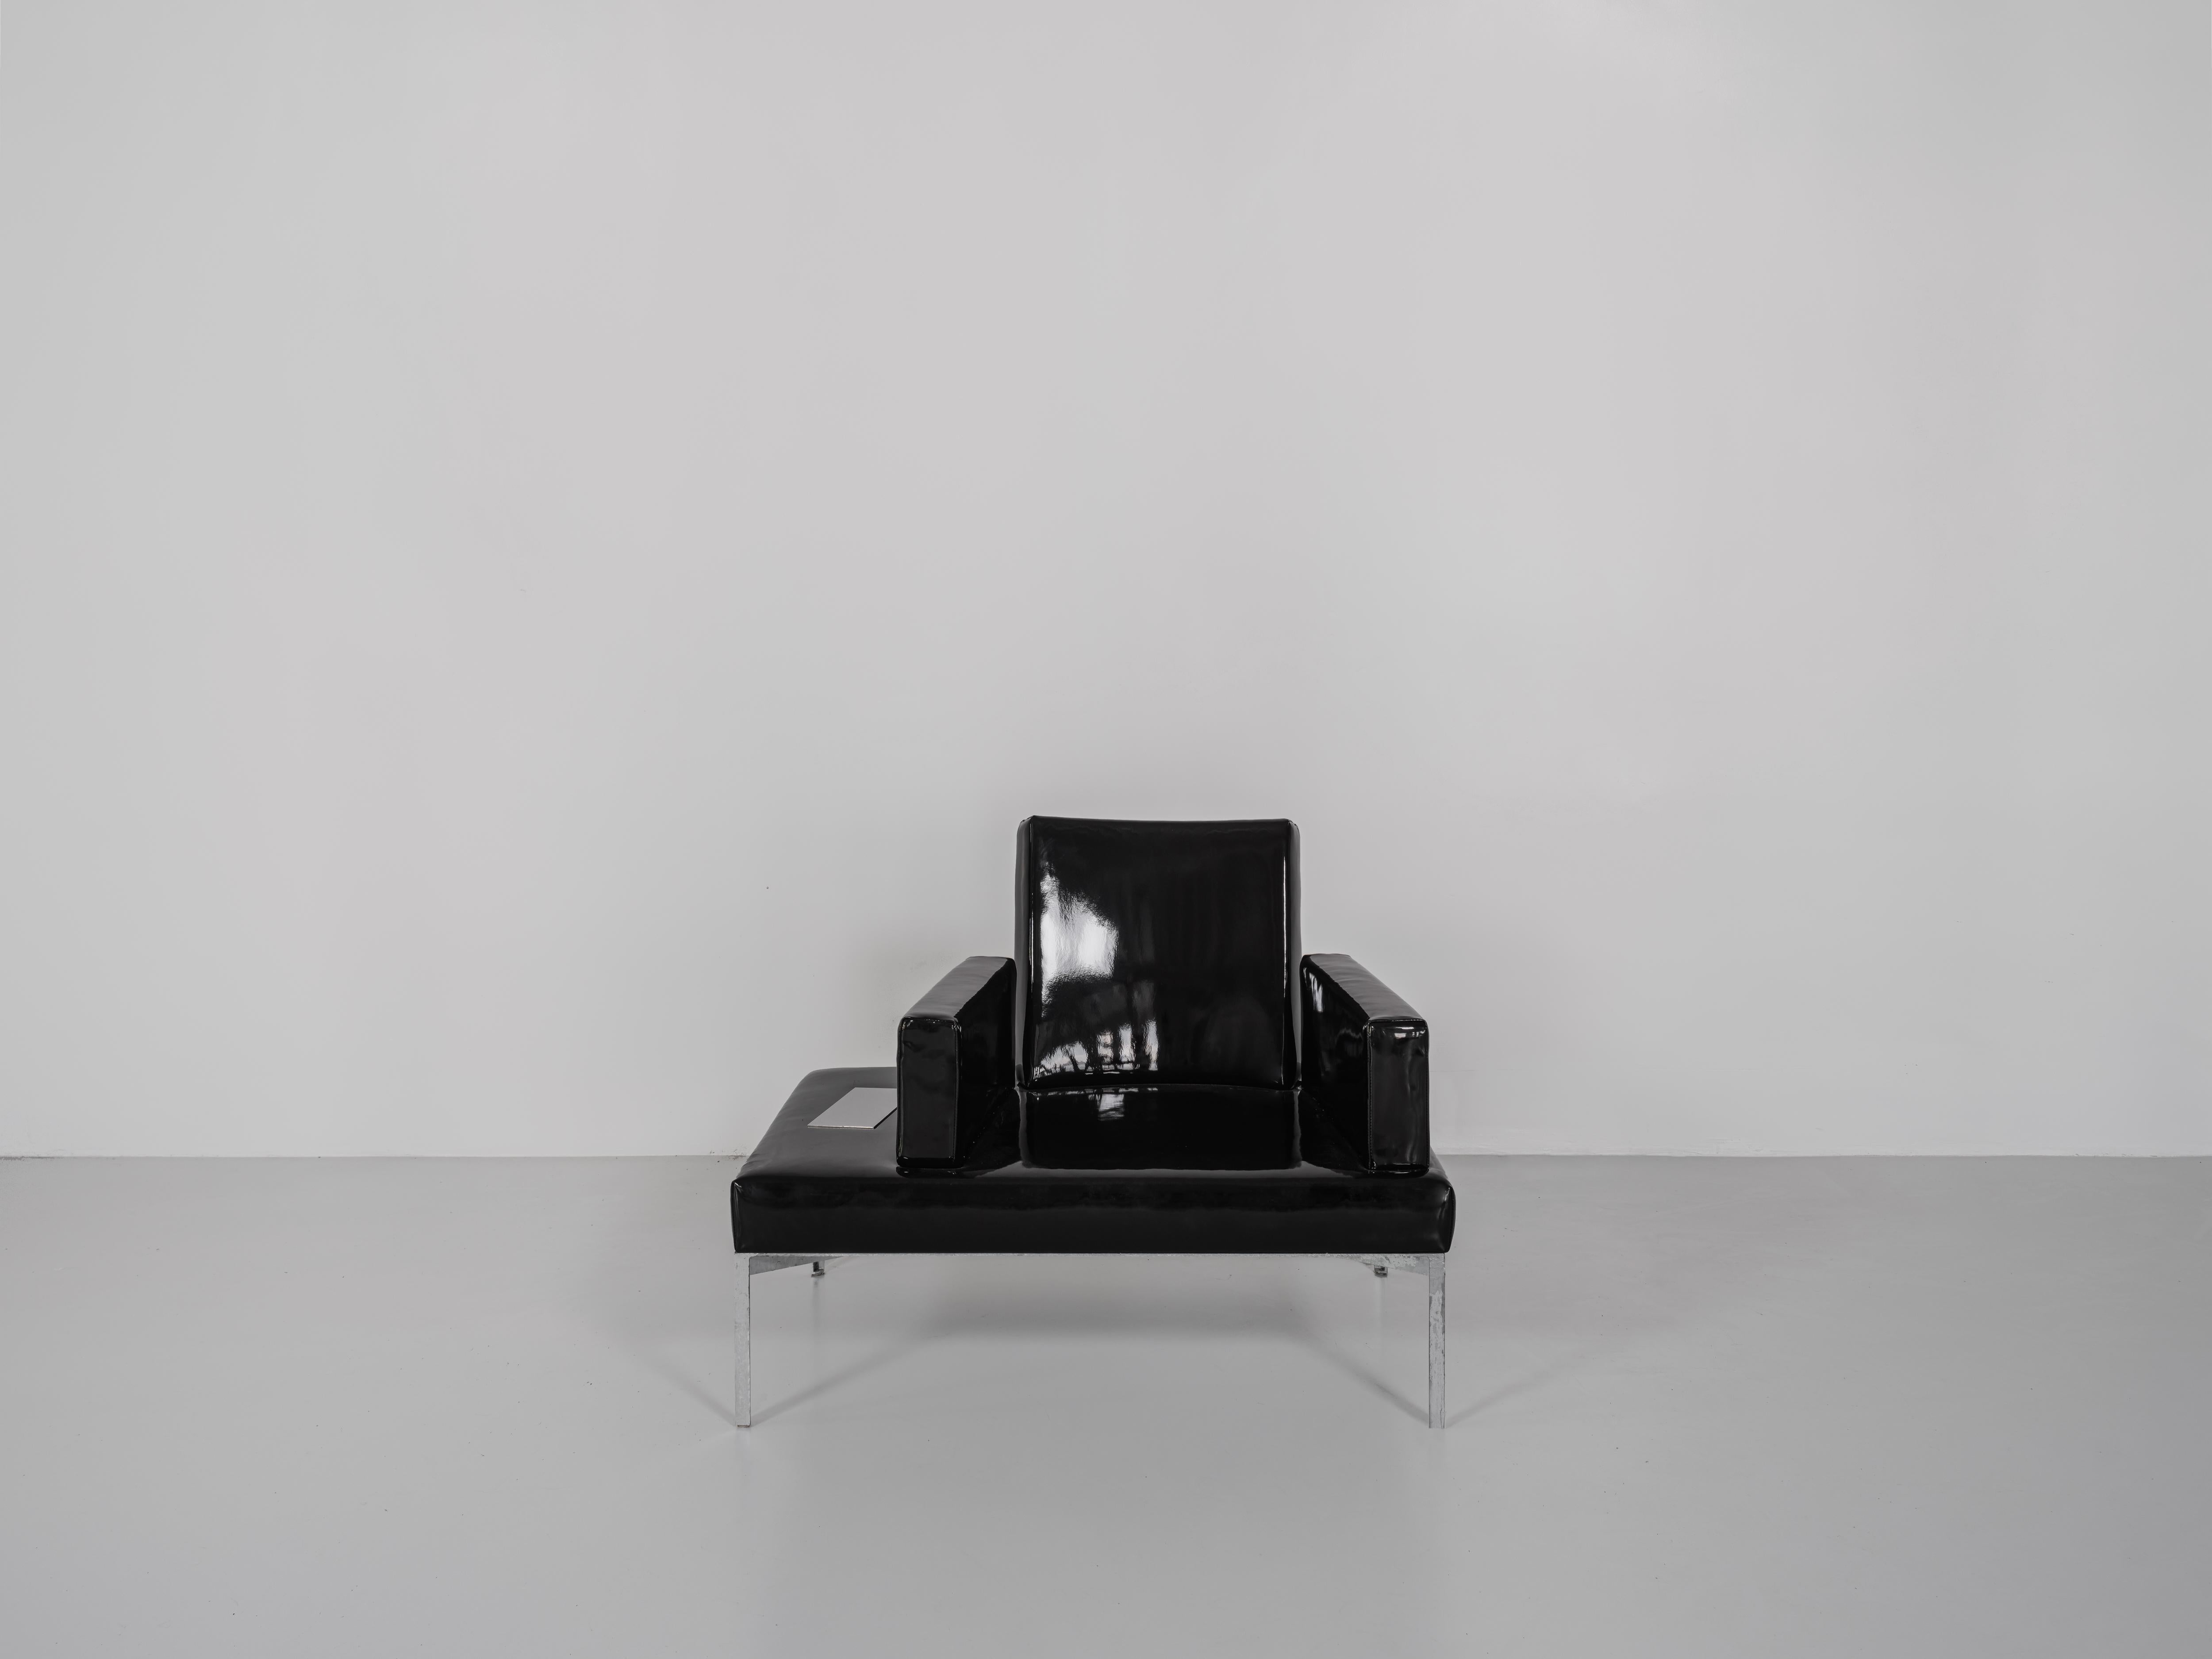 Sam Chermayeff
Club chair
From the series “Beasts”
Produced in exclusive for Side Gallery
Manufactured by ERTL und ZULL
Berlin, 2021
Galvanized steel, black vinyl upholstery
Contemporary Design

Measurements
95 cm x 69 cm x 75,5h cm (33,7